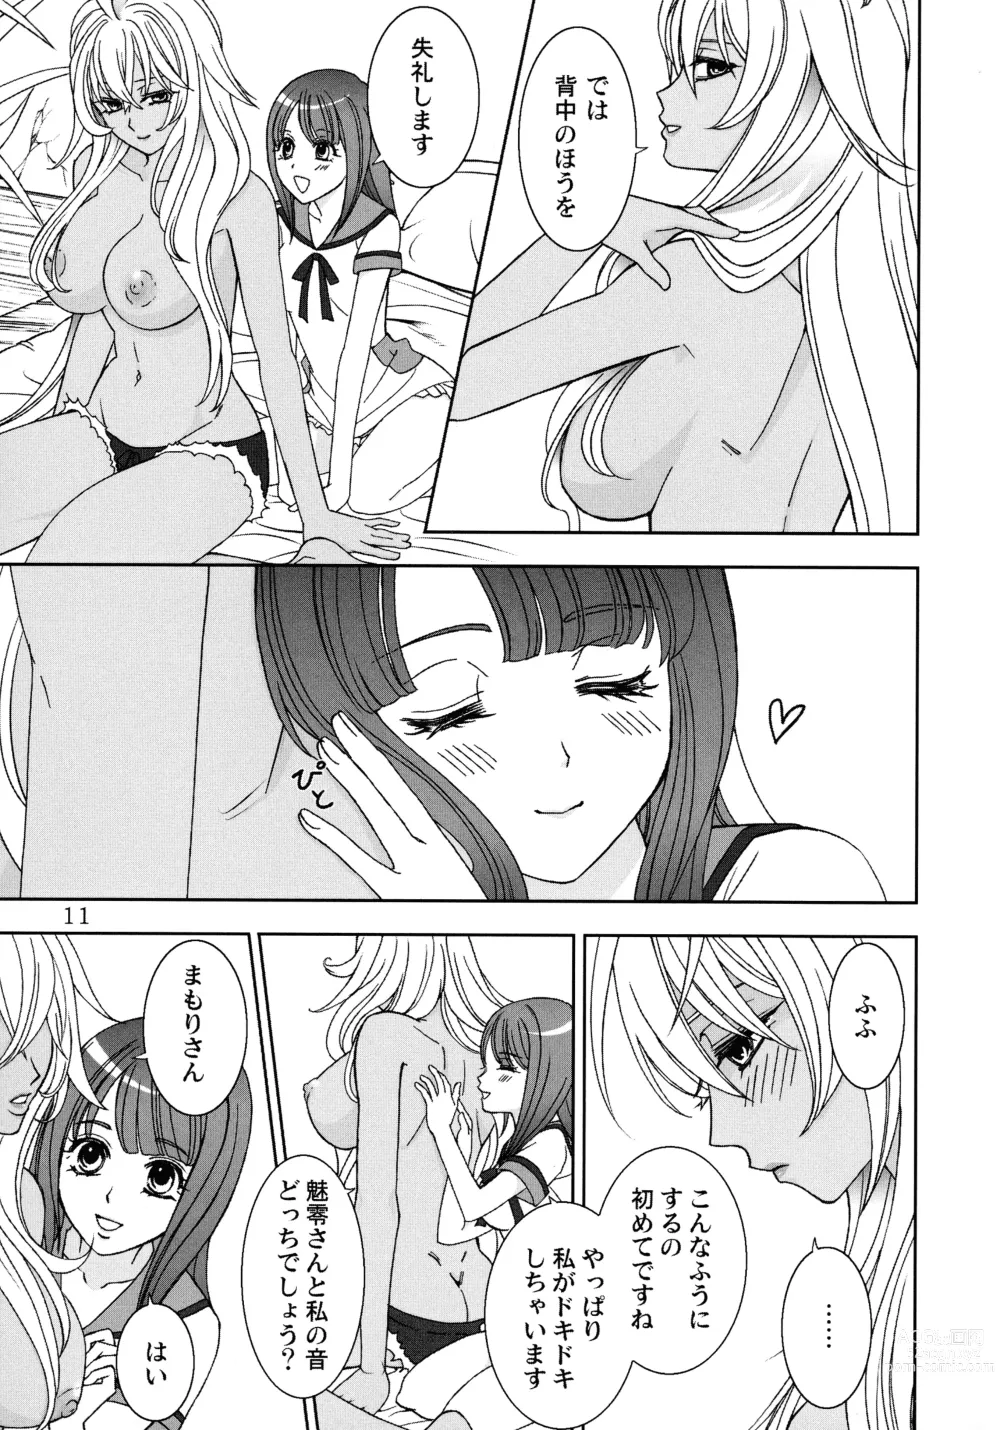 Page 10 of doujinshi Give it Away